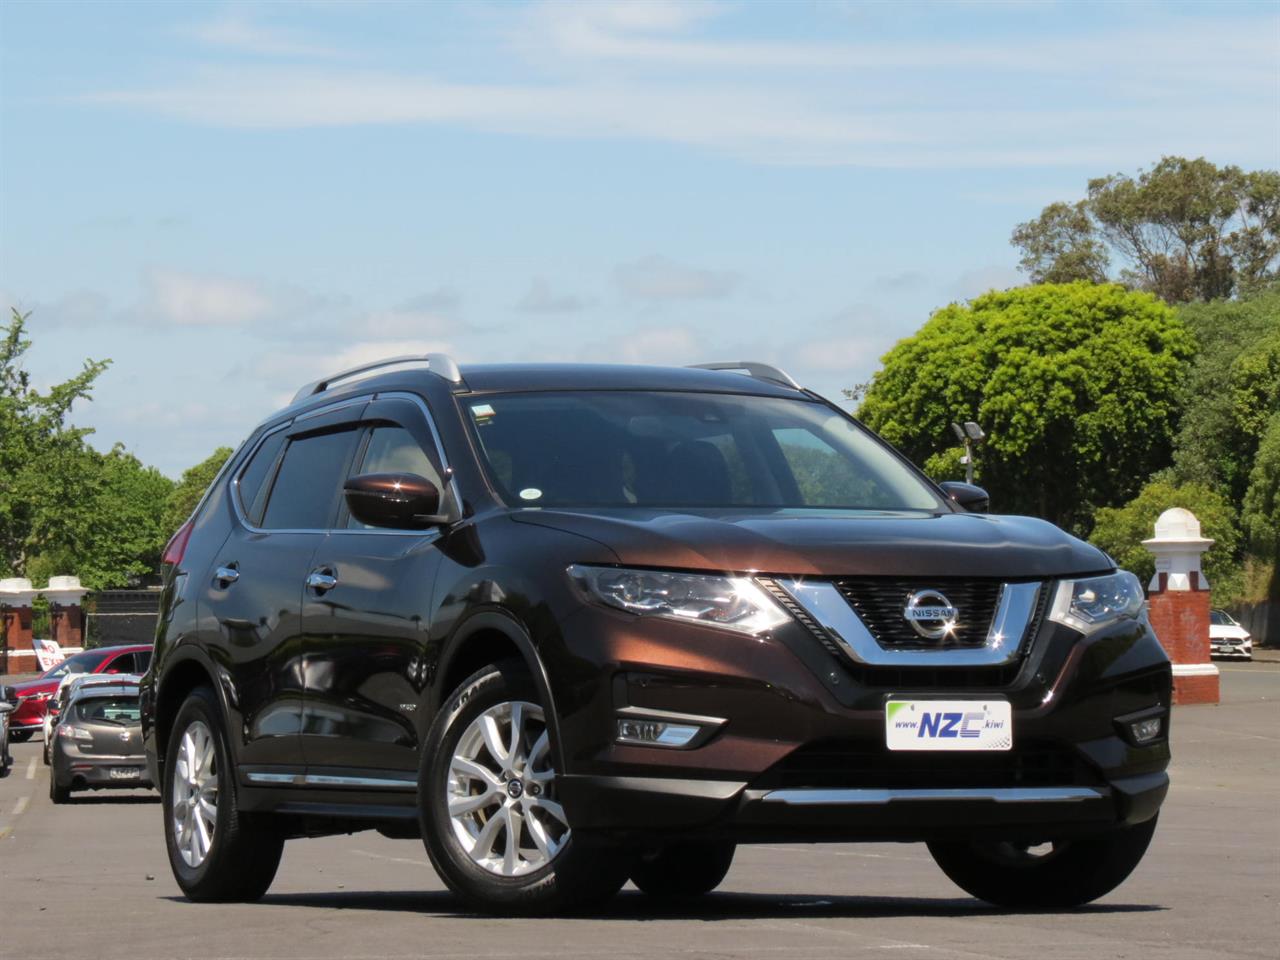 NZC 2018 Nissan X-TRAIL just arrived to Auckland